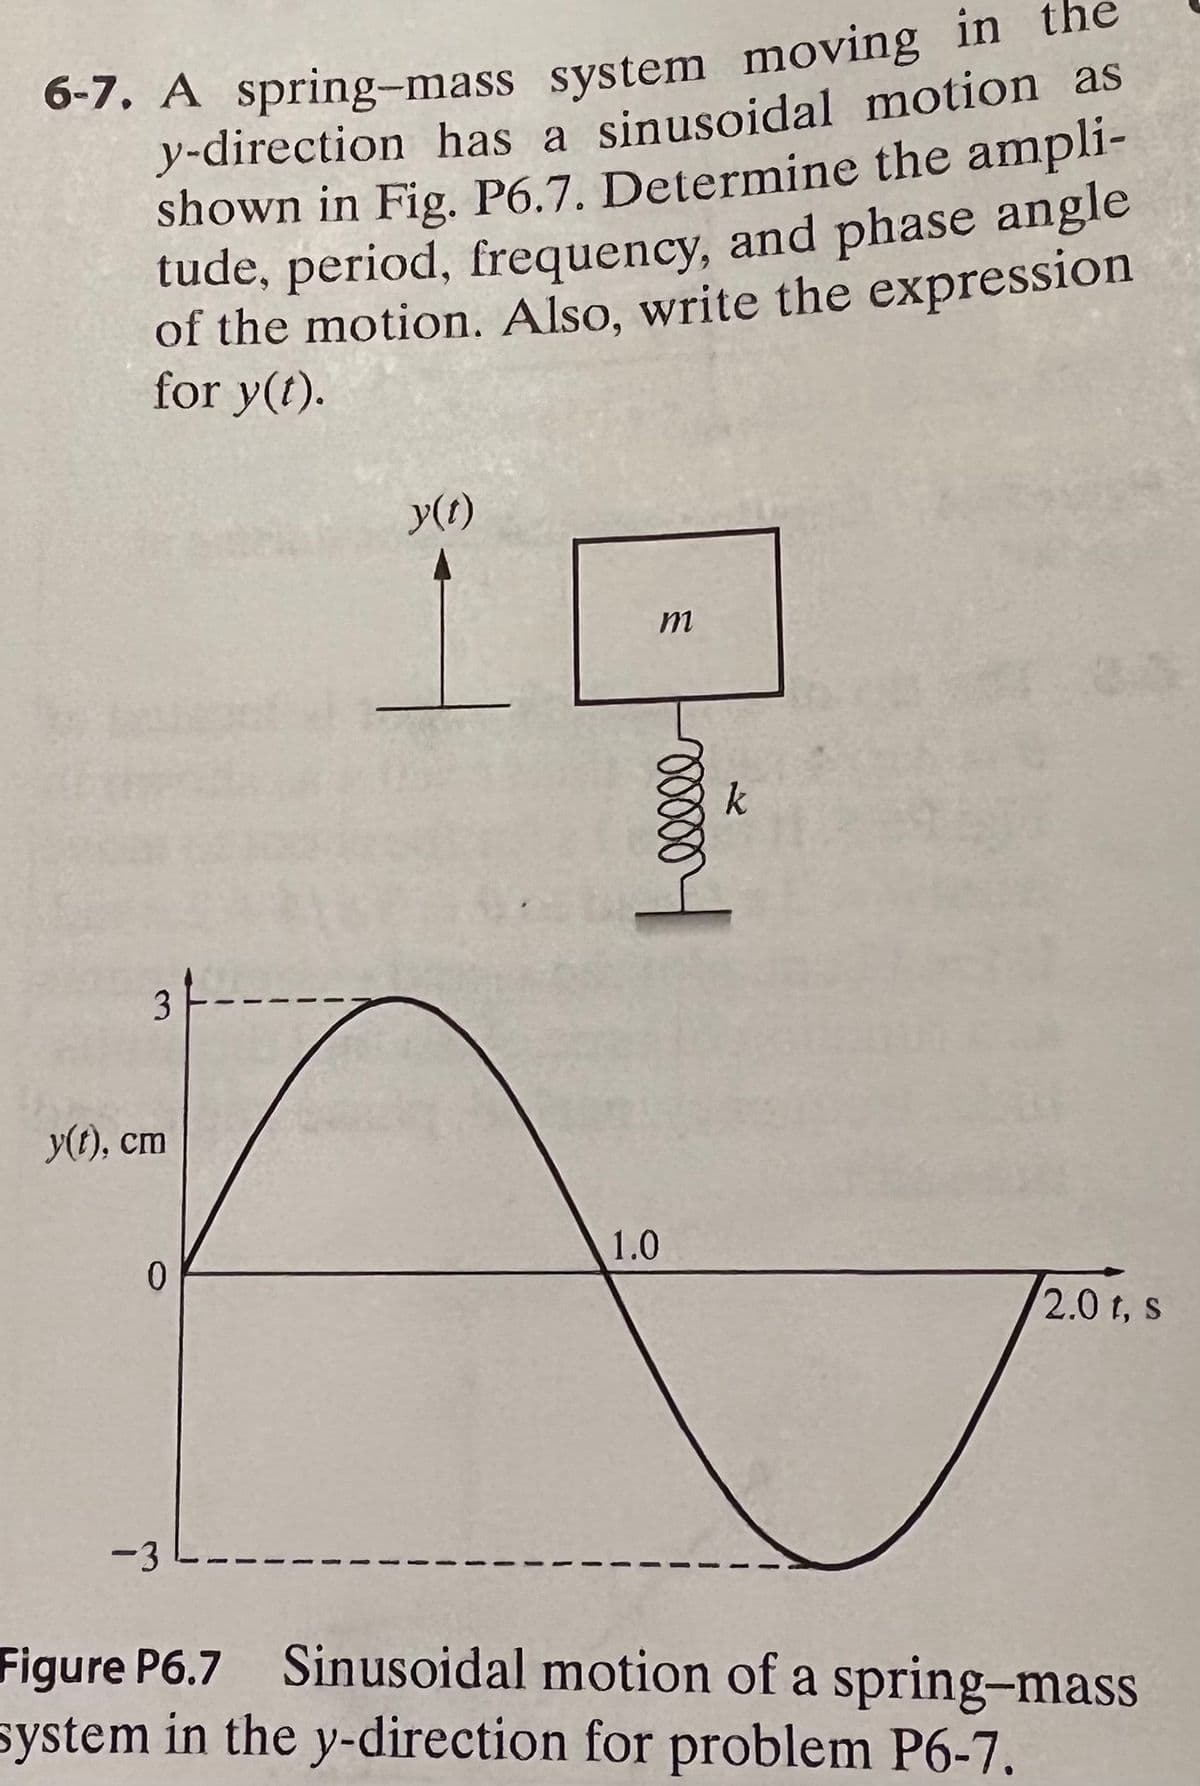 6-7. A spring-mass system moving in the
y-direction has a sinusoidal motion as
shown in Fig. P6.7. Determine the ampli-
tude, period, frequency, and phase angle
of the motion. Also, write the expression
for y(t).
y(t)
m
k
3
y(t), cm
1.0
0.
2.0 t, s
-3
Figure P6.7 Sinusoidal motion of a spring-mass
system in the y-direction for problem P6-7.
